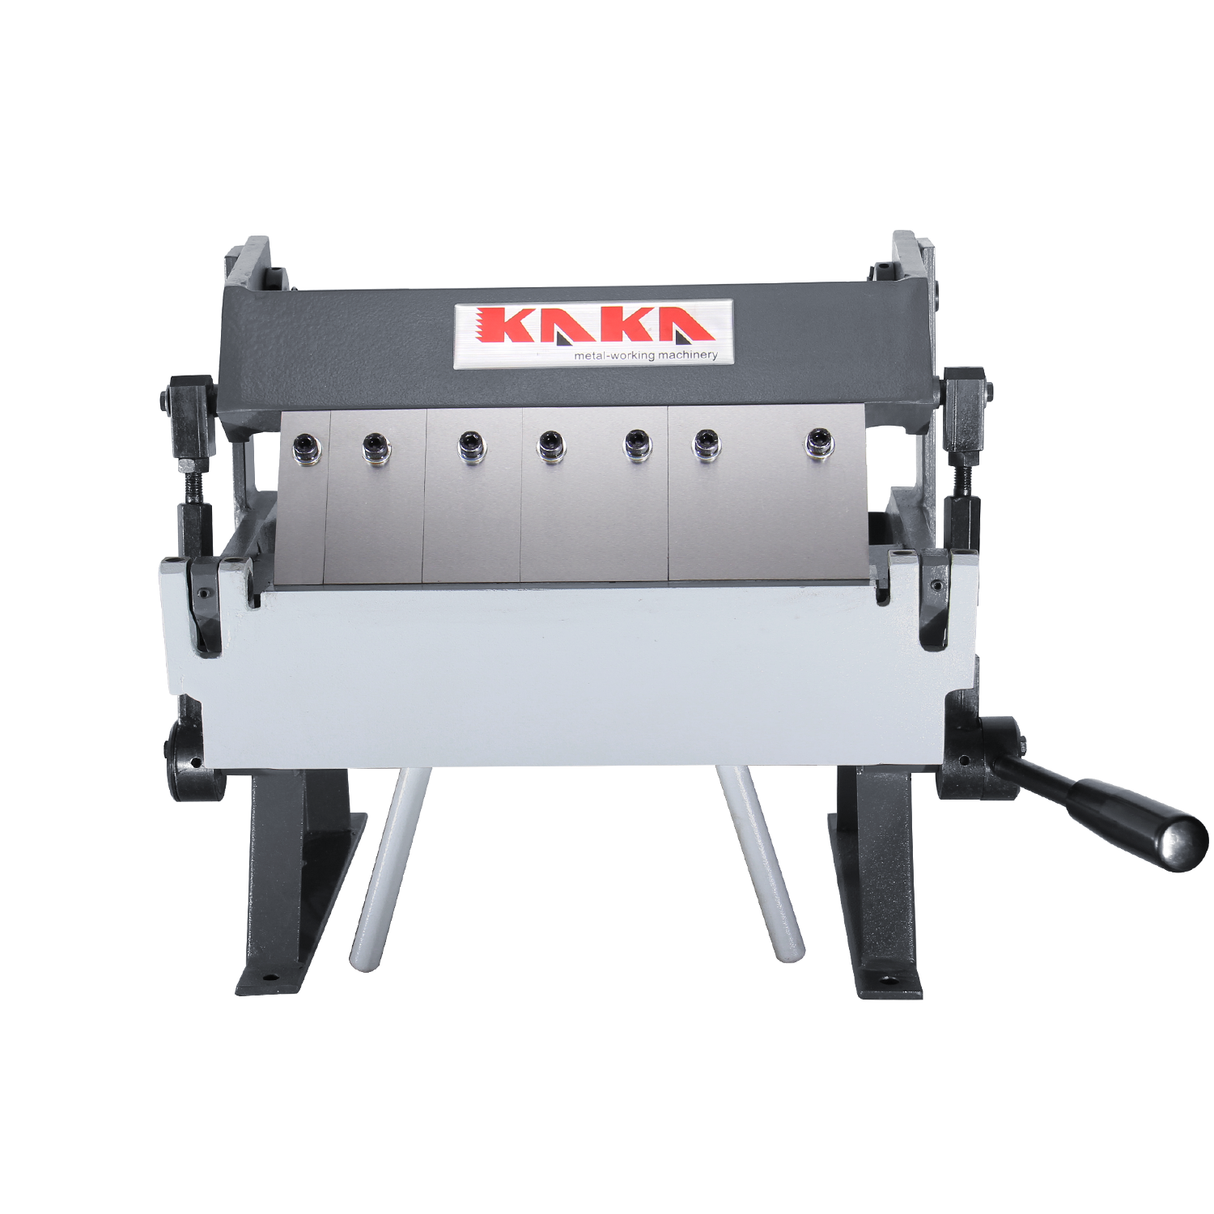 HIGH CAPACITY AND VERSATILITY. KAKAIND 12In pan and box brake can bends mild steels up to 20 gauge thick, 12-inches wide with angle 0-135 degrees. It is an ideal tool if you need to increase the strength of sheet metal plates with bends, or you intend on fabricating more complicated brackets, gussets, boxes, or fixtures. You can save more time on working and enjoy more family time